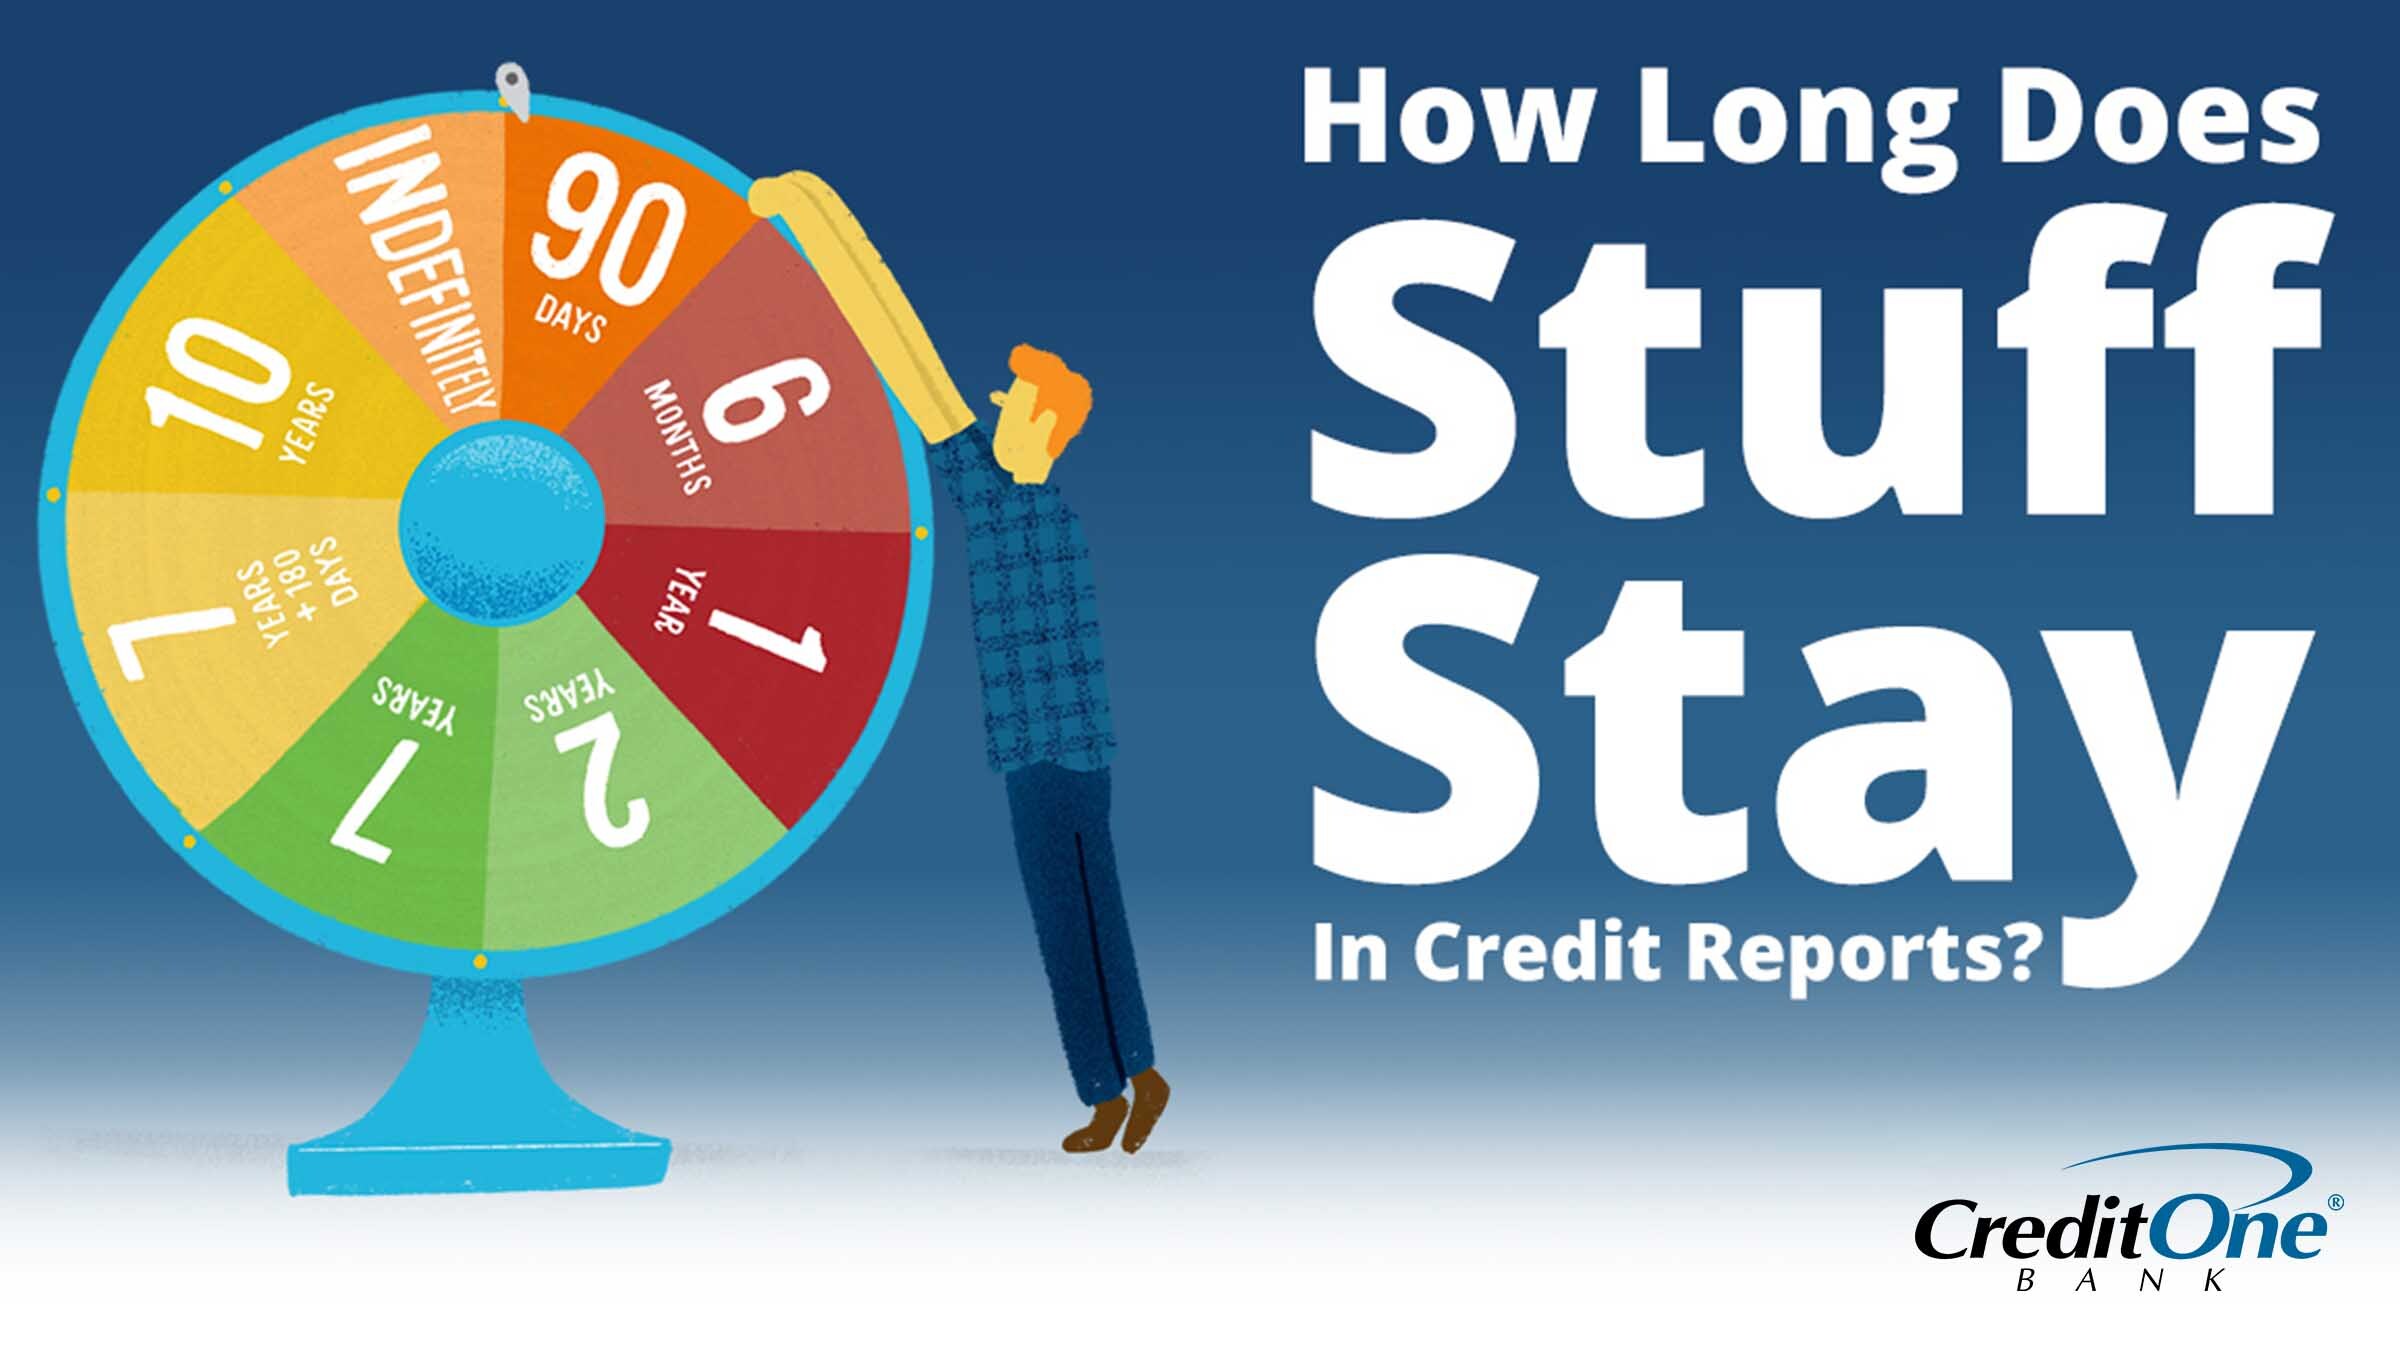 How Long Information Stays in Credit Reports [Infographic]